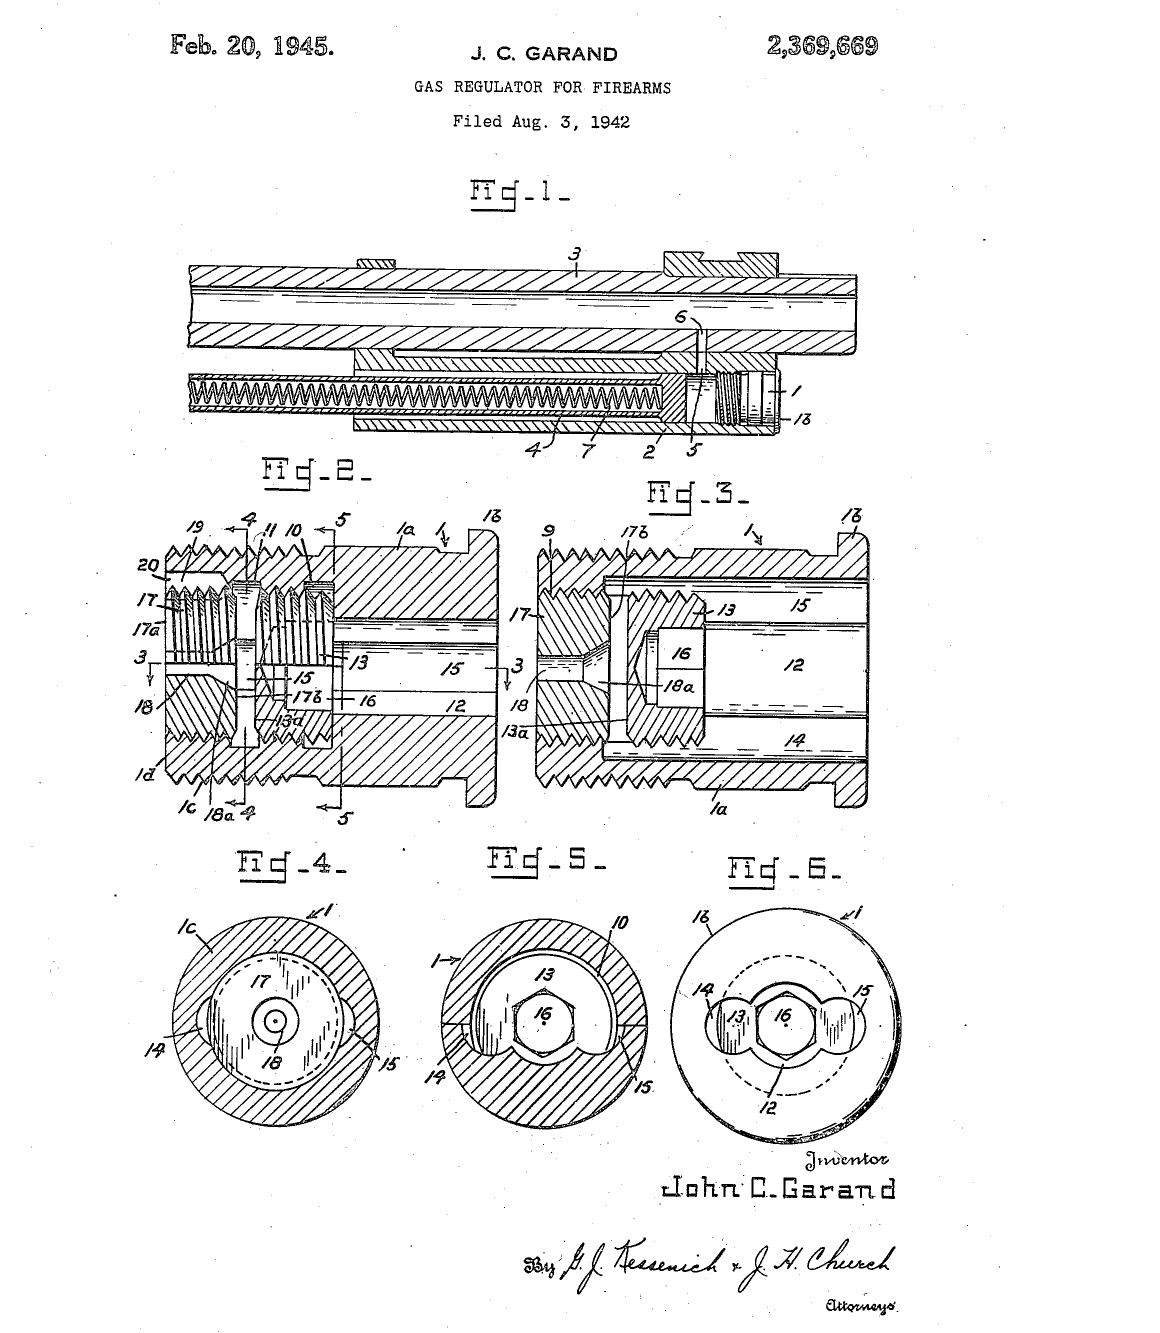 U.S. Patent 2,369,669 drawing of John Garand's venting gas screw for the M1 rifle.